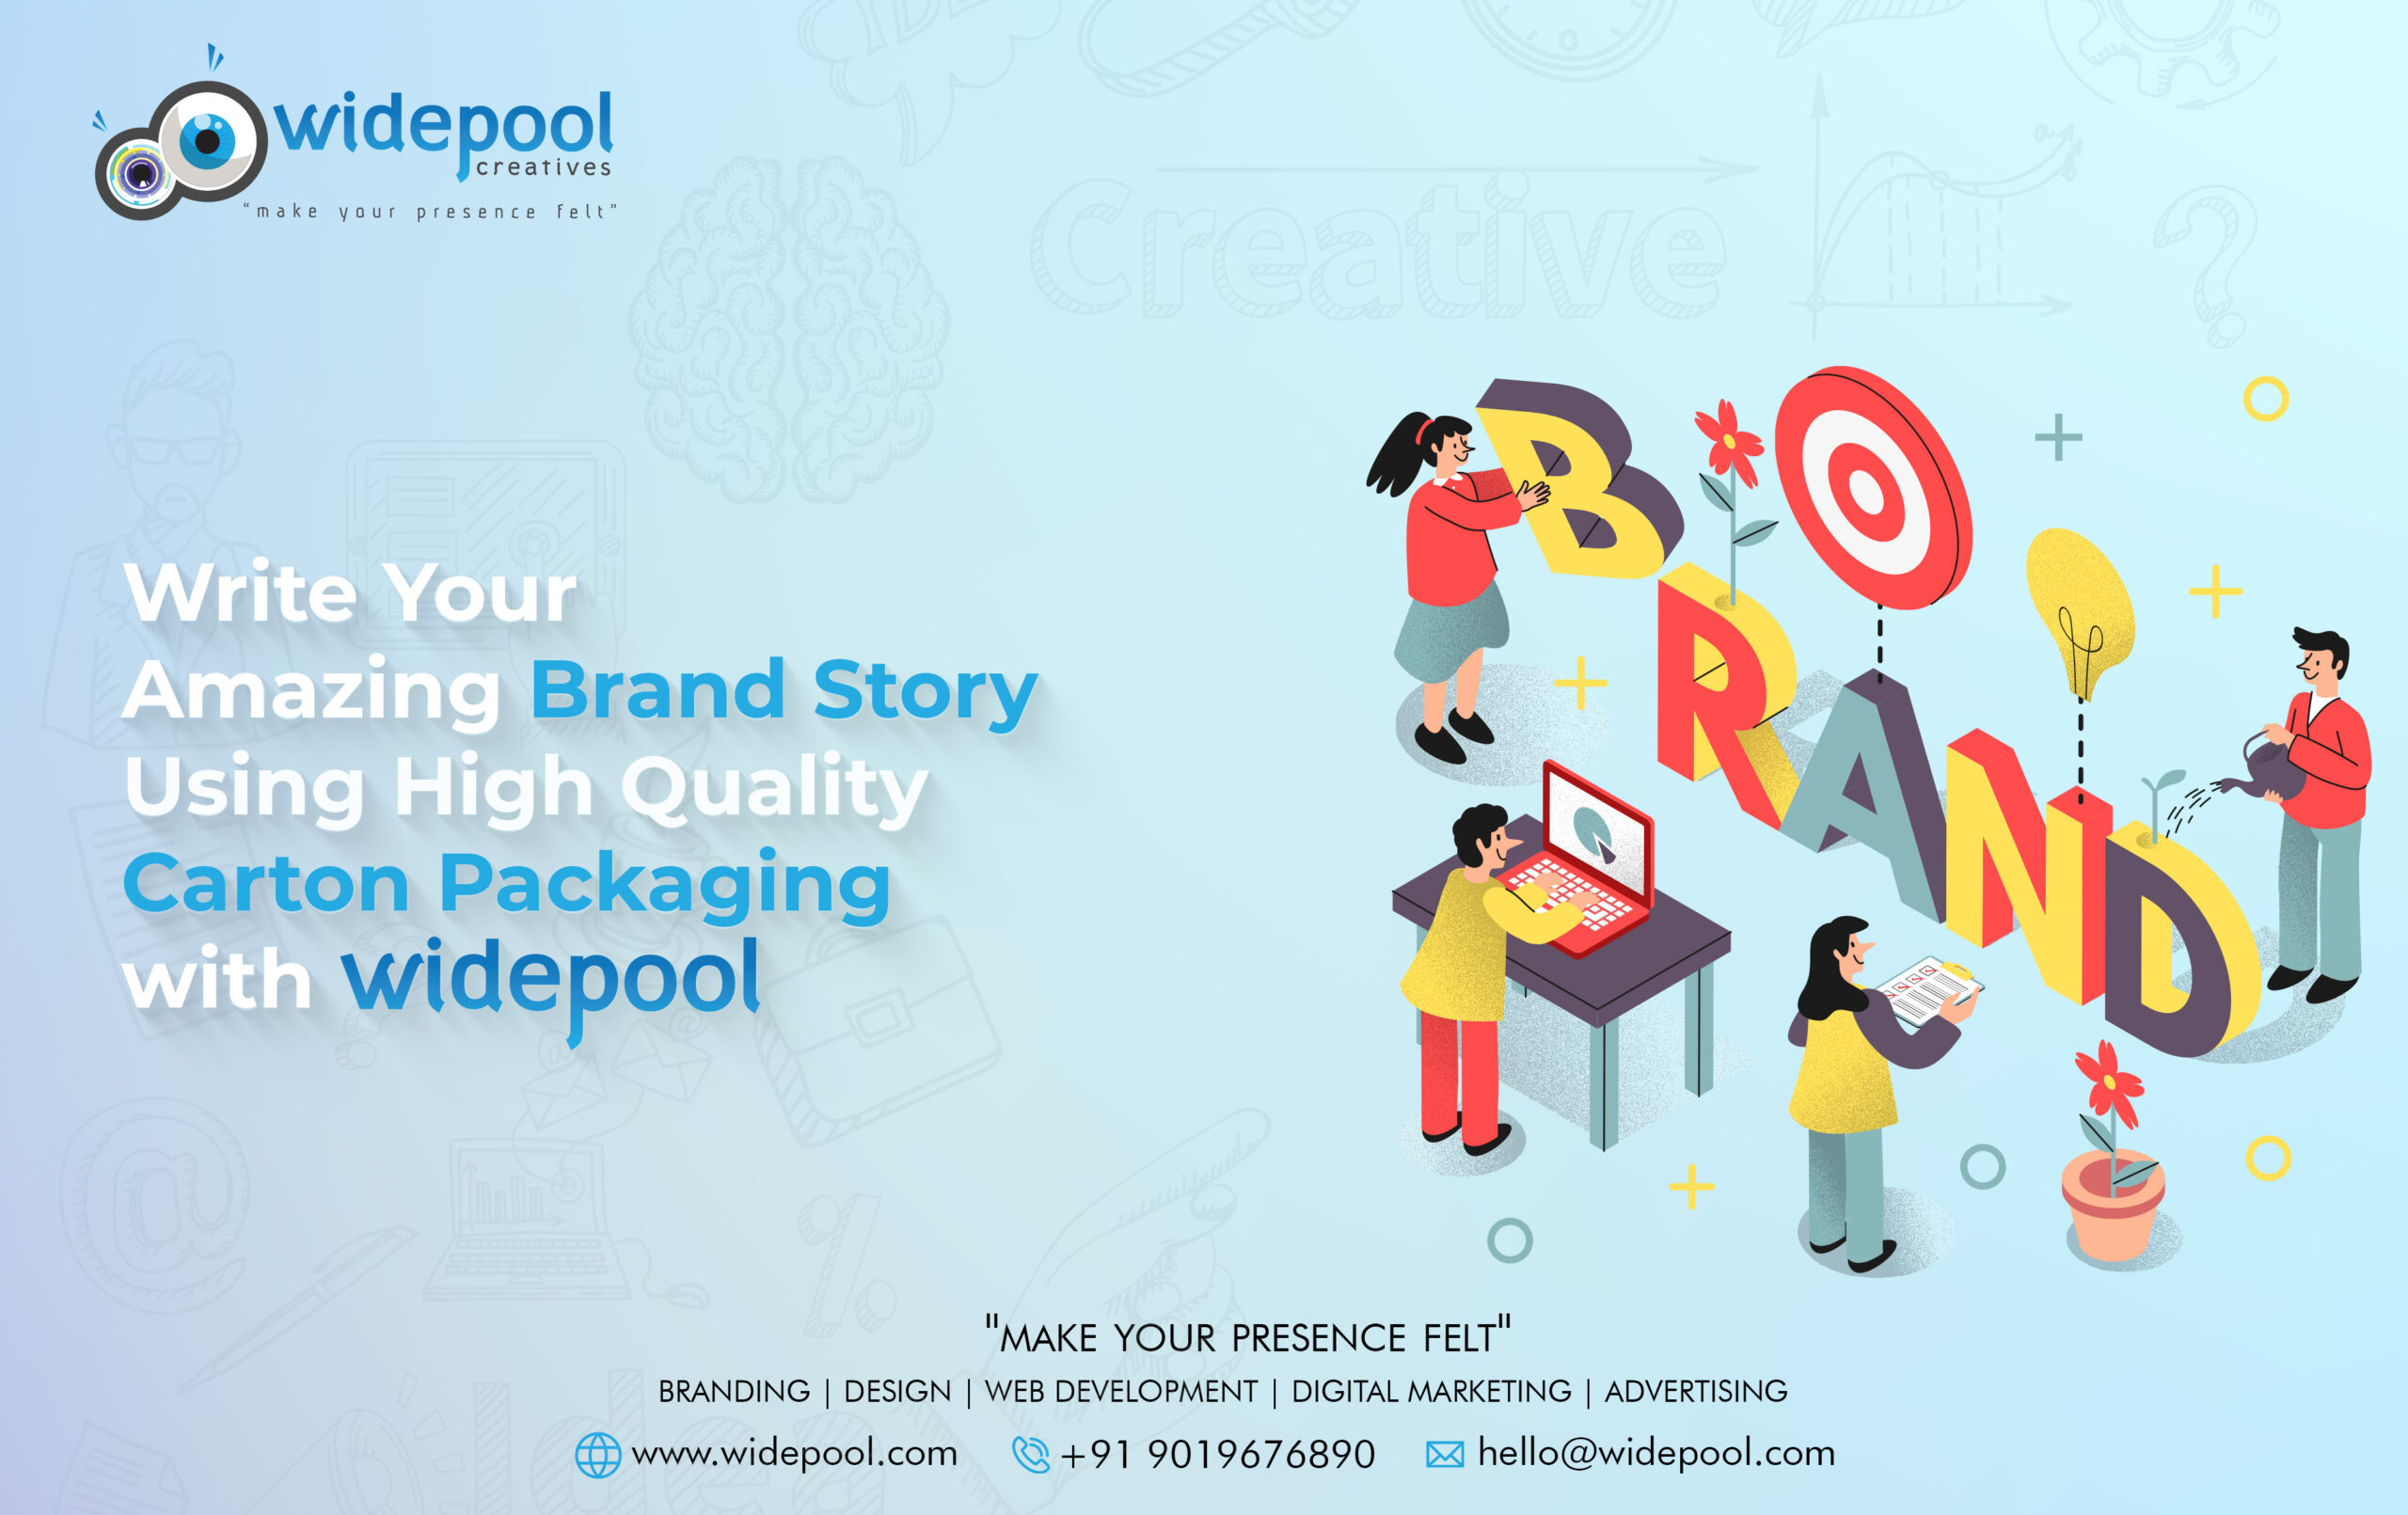 Write Your Amazing Brand Story Using High Quality Carton Packaging with Widepool!